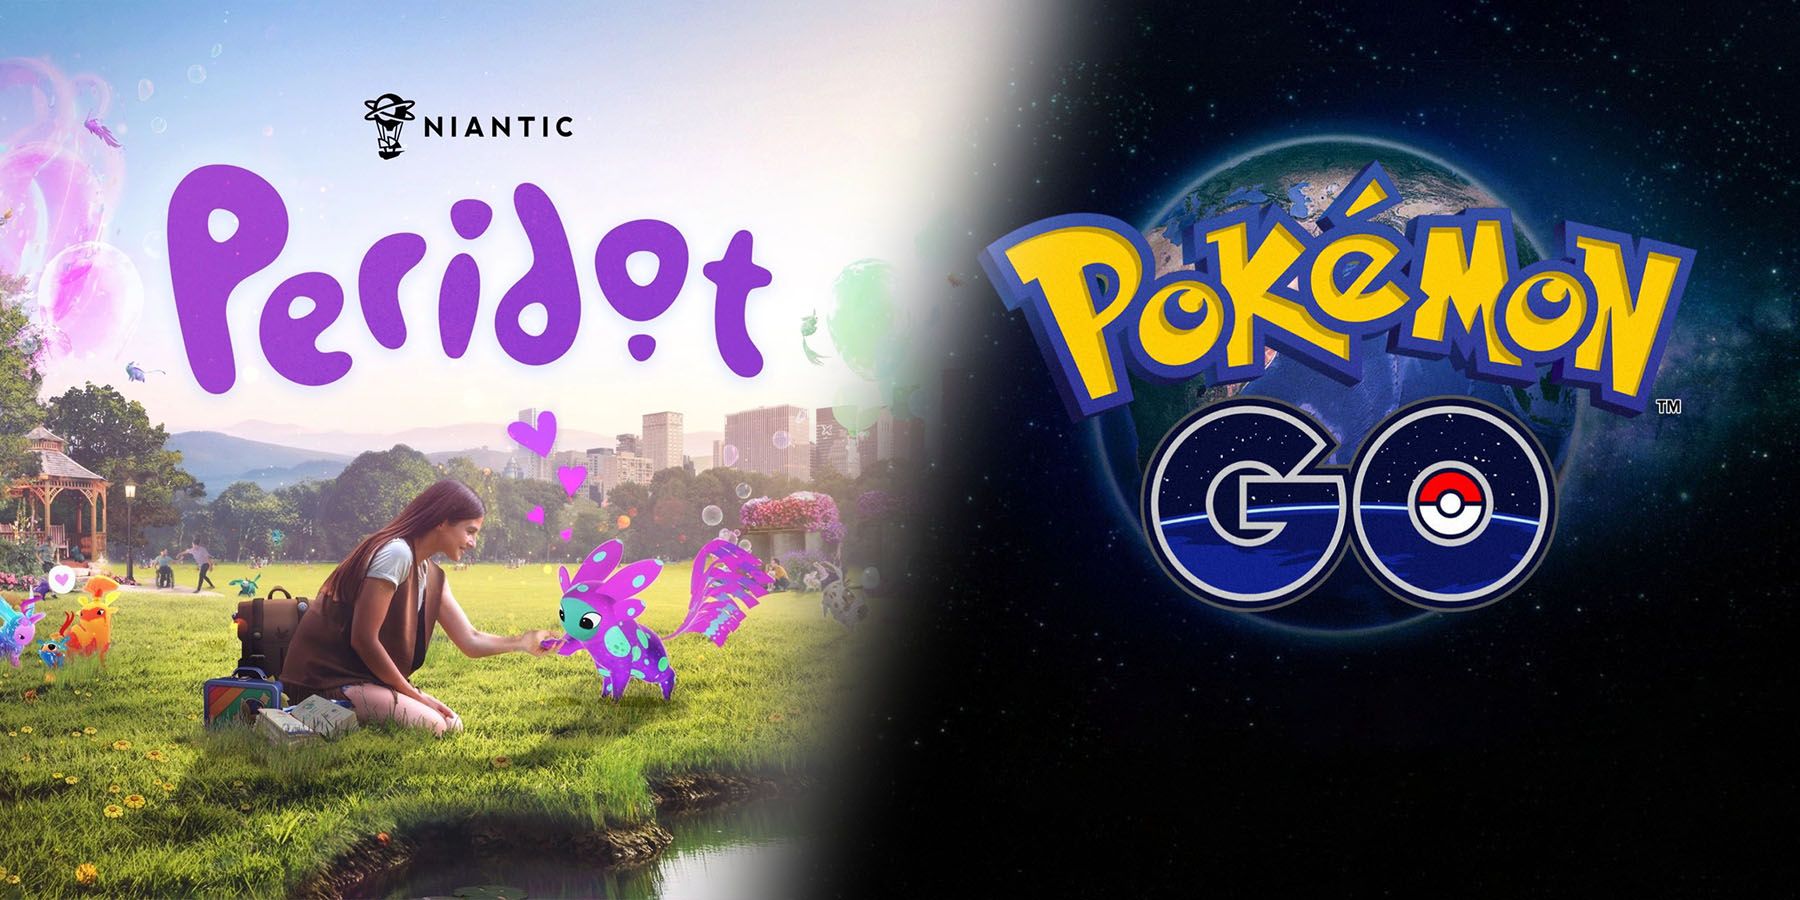 A first look at Peridot, the new AR game from the creators of Pokémon Go